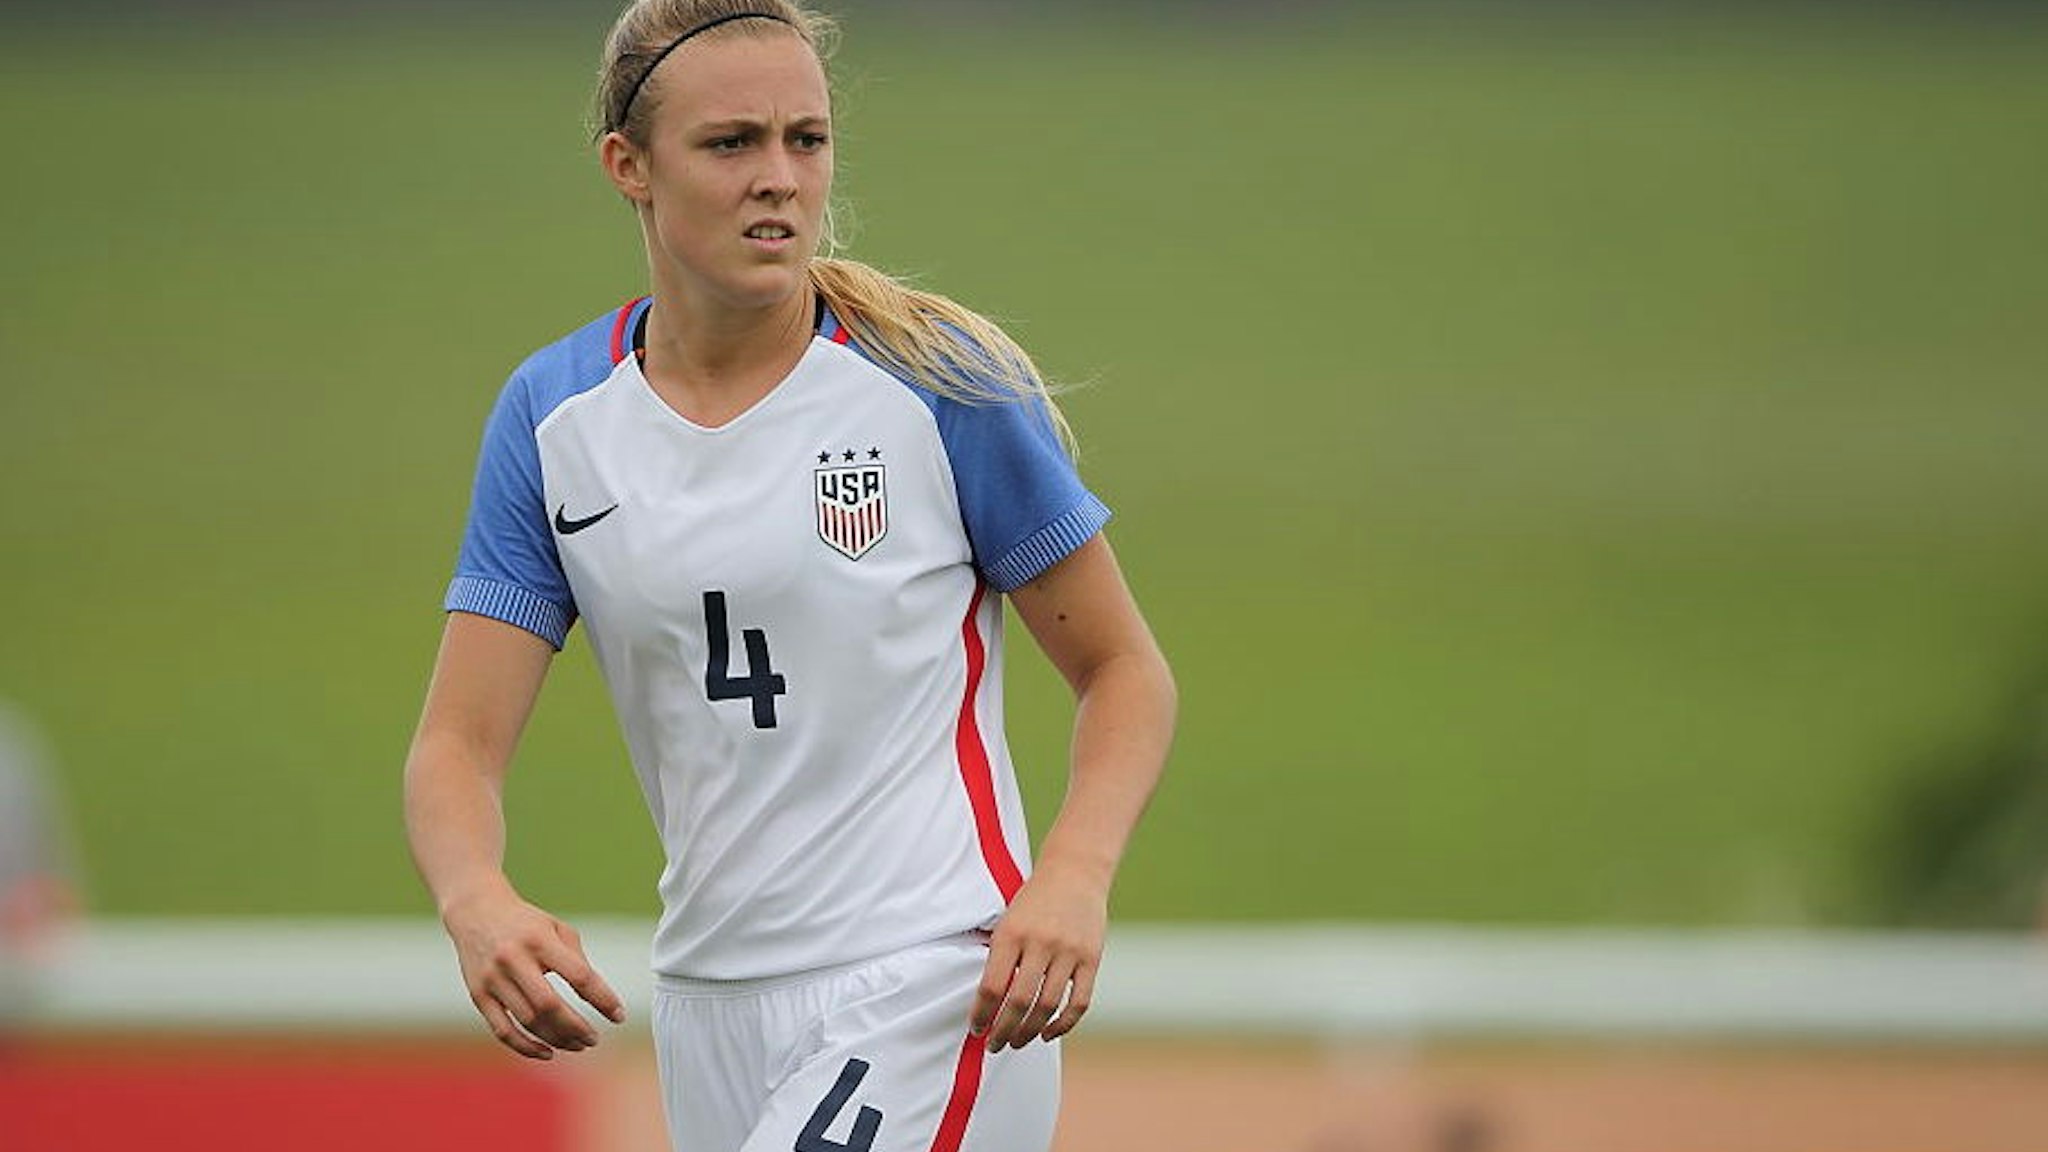 Rachel Hill of United States of America Women U23 during the U-23 Women's Nordic Tournament between USA and Norway at St Georges Park on June 4, 2016 in Burton-upon-Trent, England.